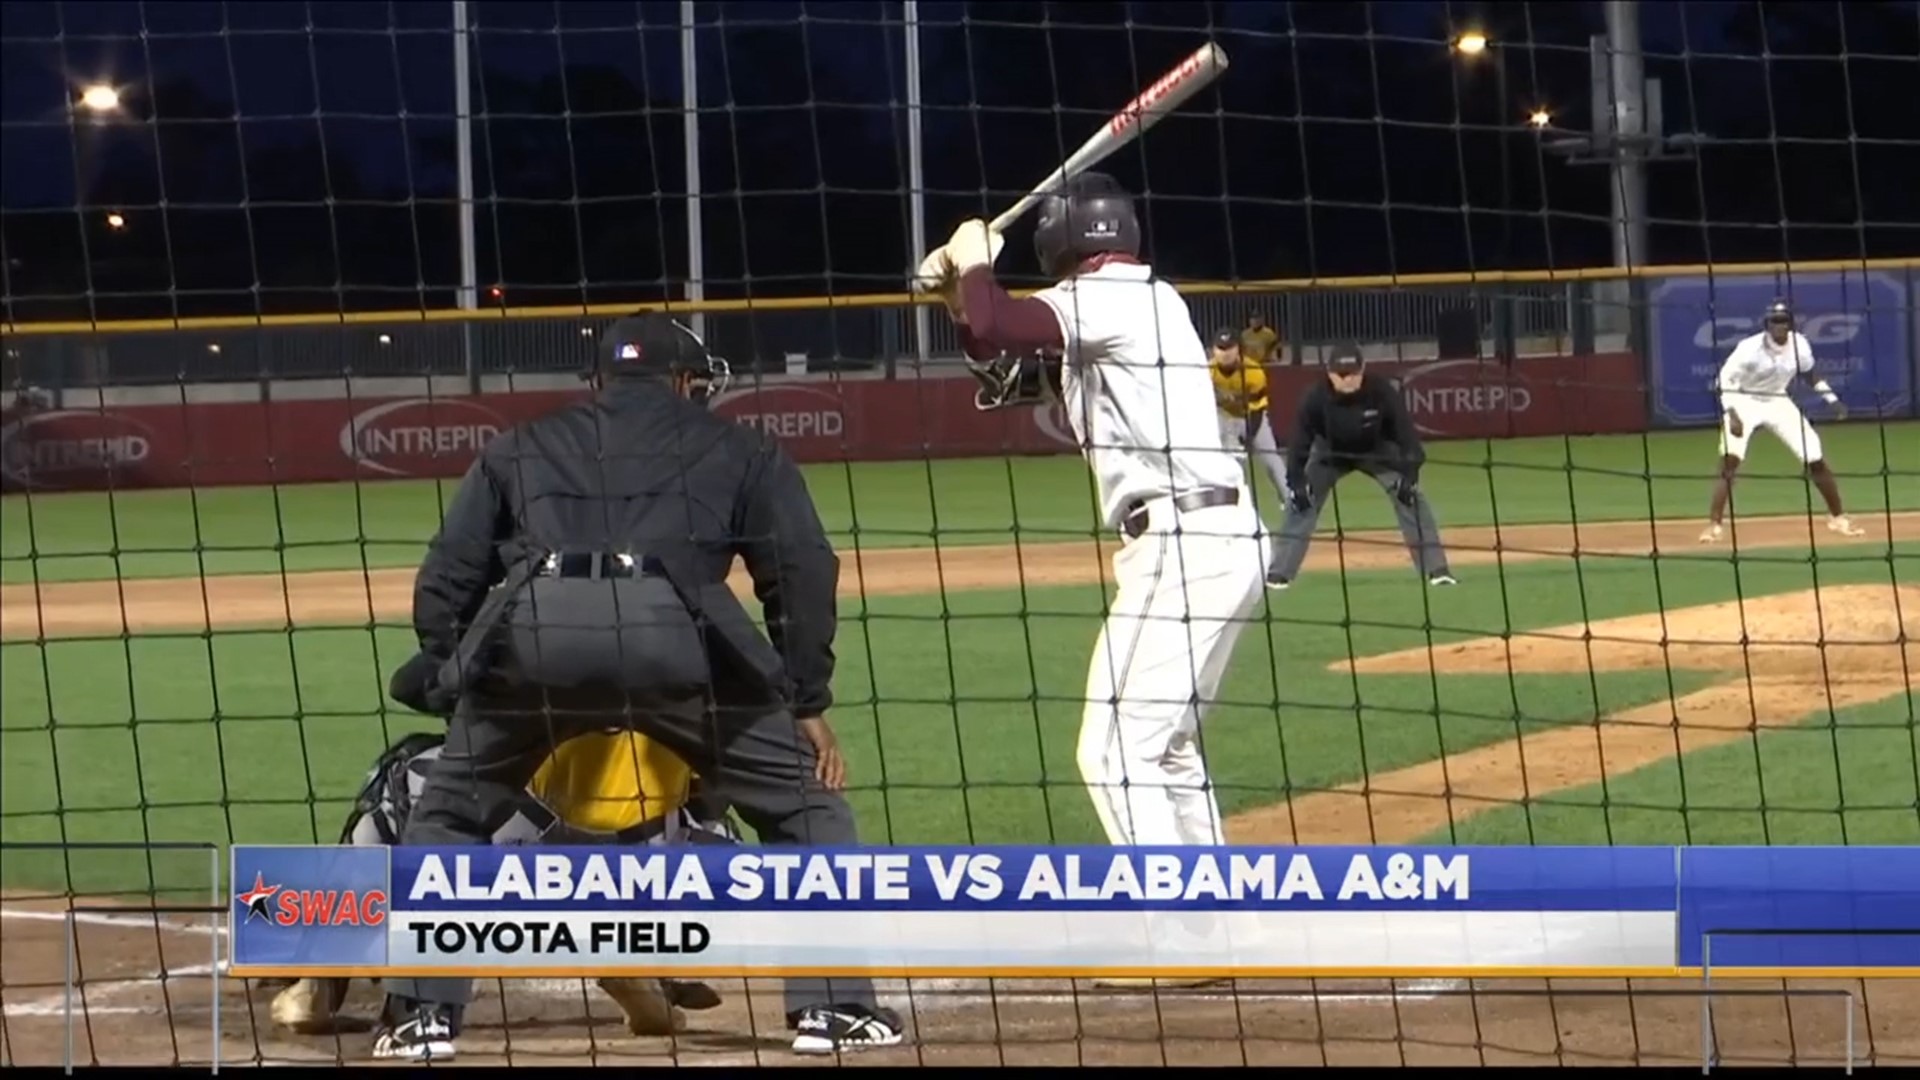 Alabama A&M snapped Alabama State's six-game conference win streak Thursday with a 10-8 victory at Toyota Field on Thursday evening.